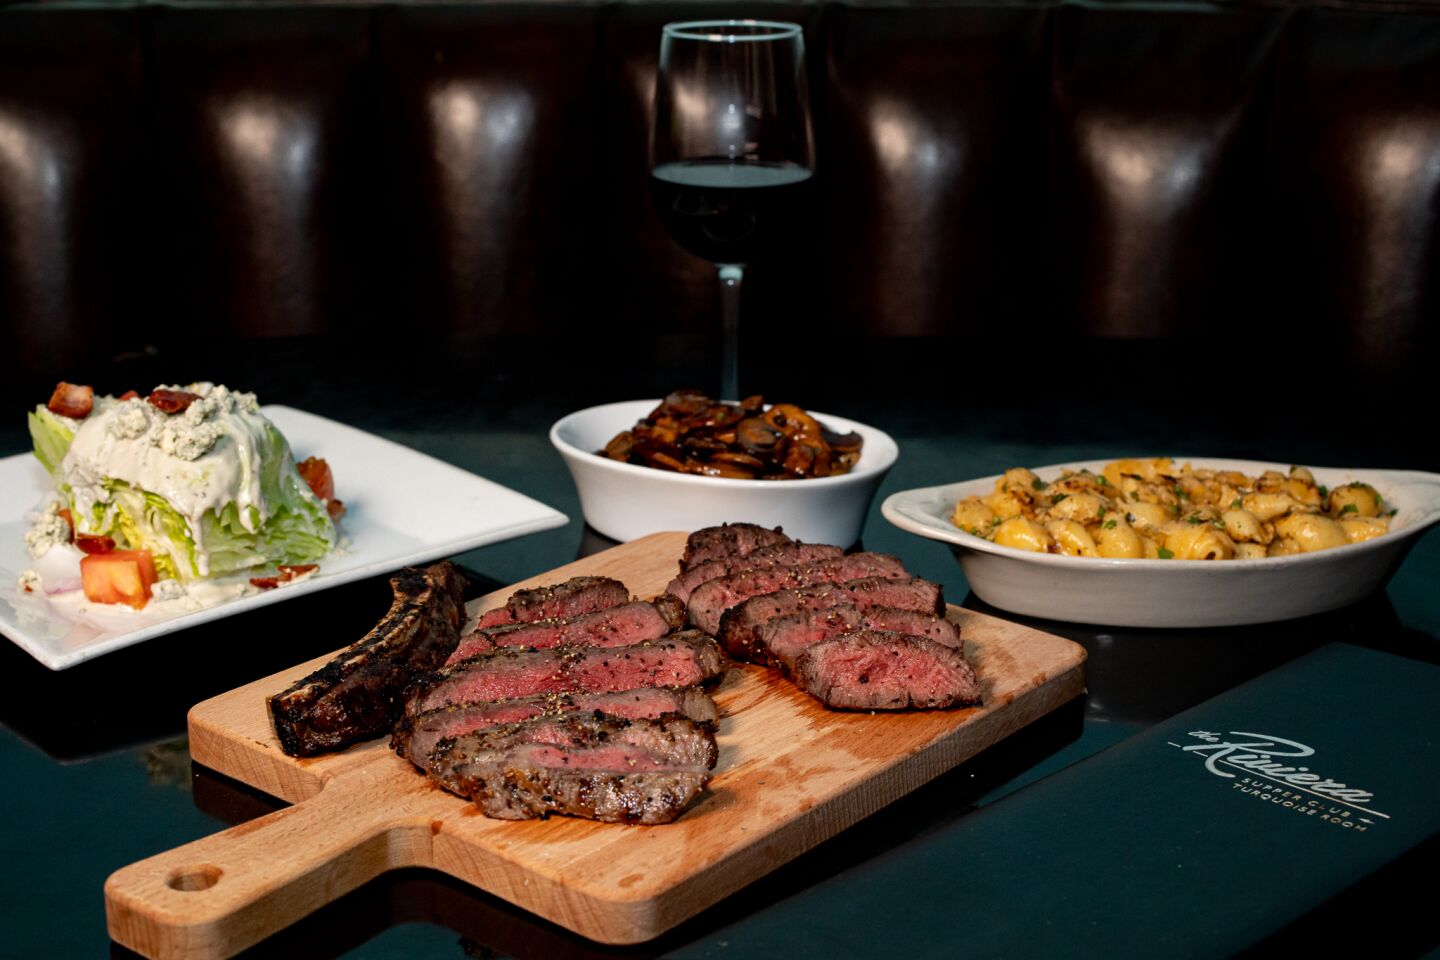 A steak dinner from the Riviera Supper Club and Turquoise Room.